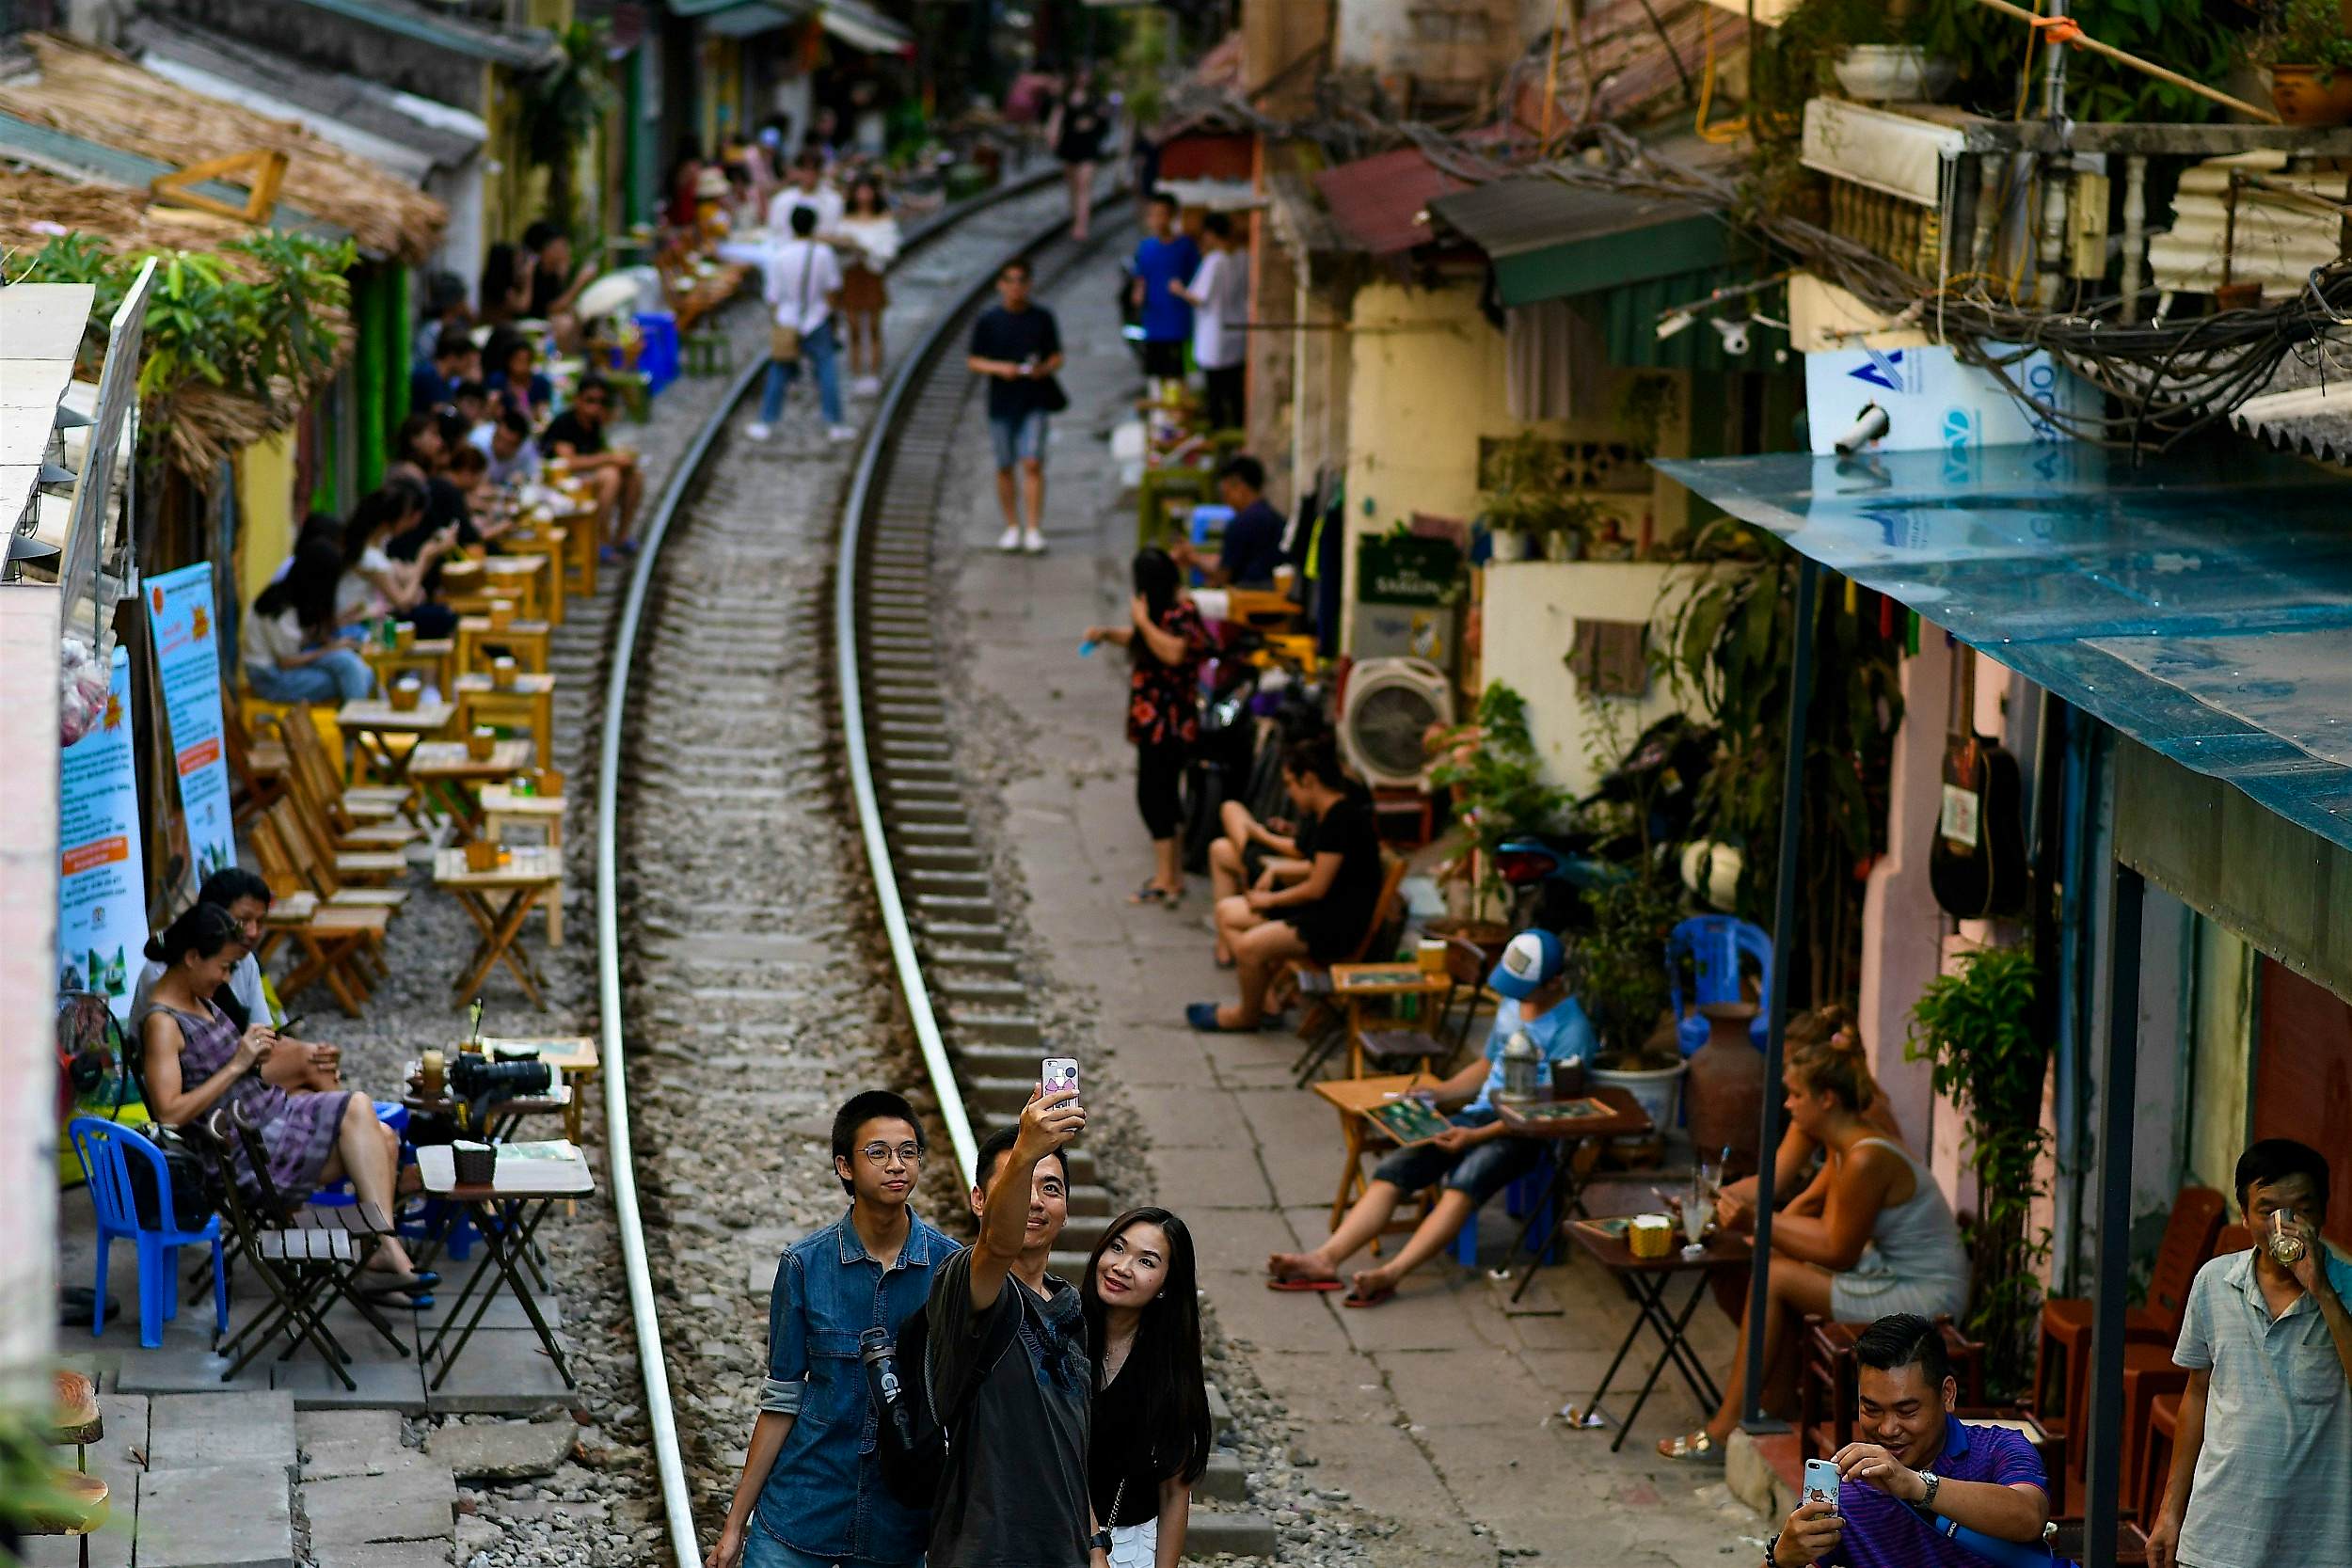 Hanoi's Instagramfamous Train Street is set for a revamp Lonely